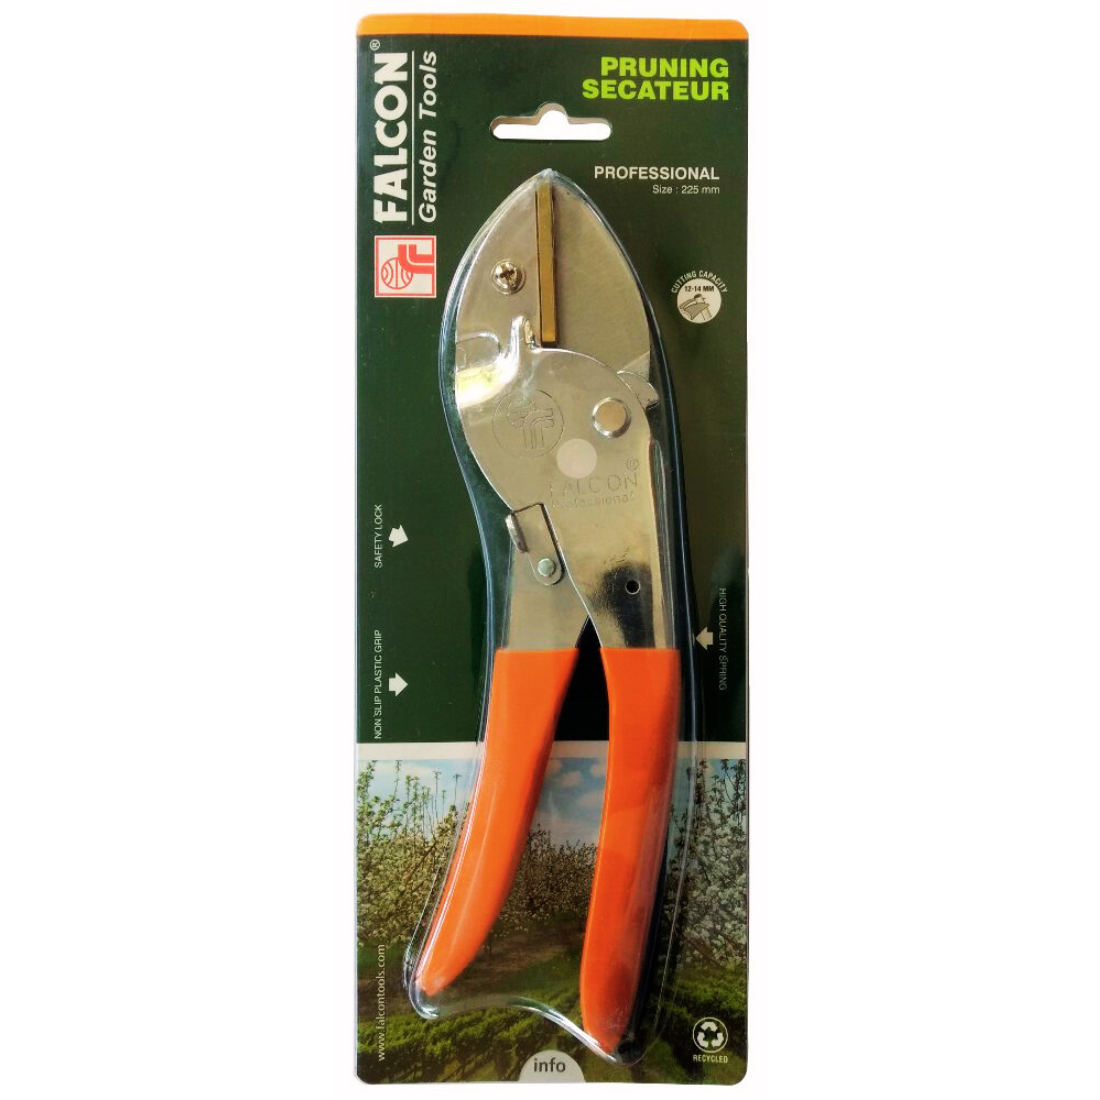 Falcon Pruning Professional Secateur